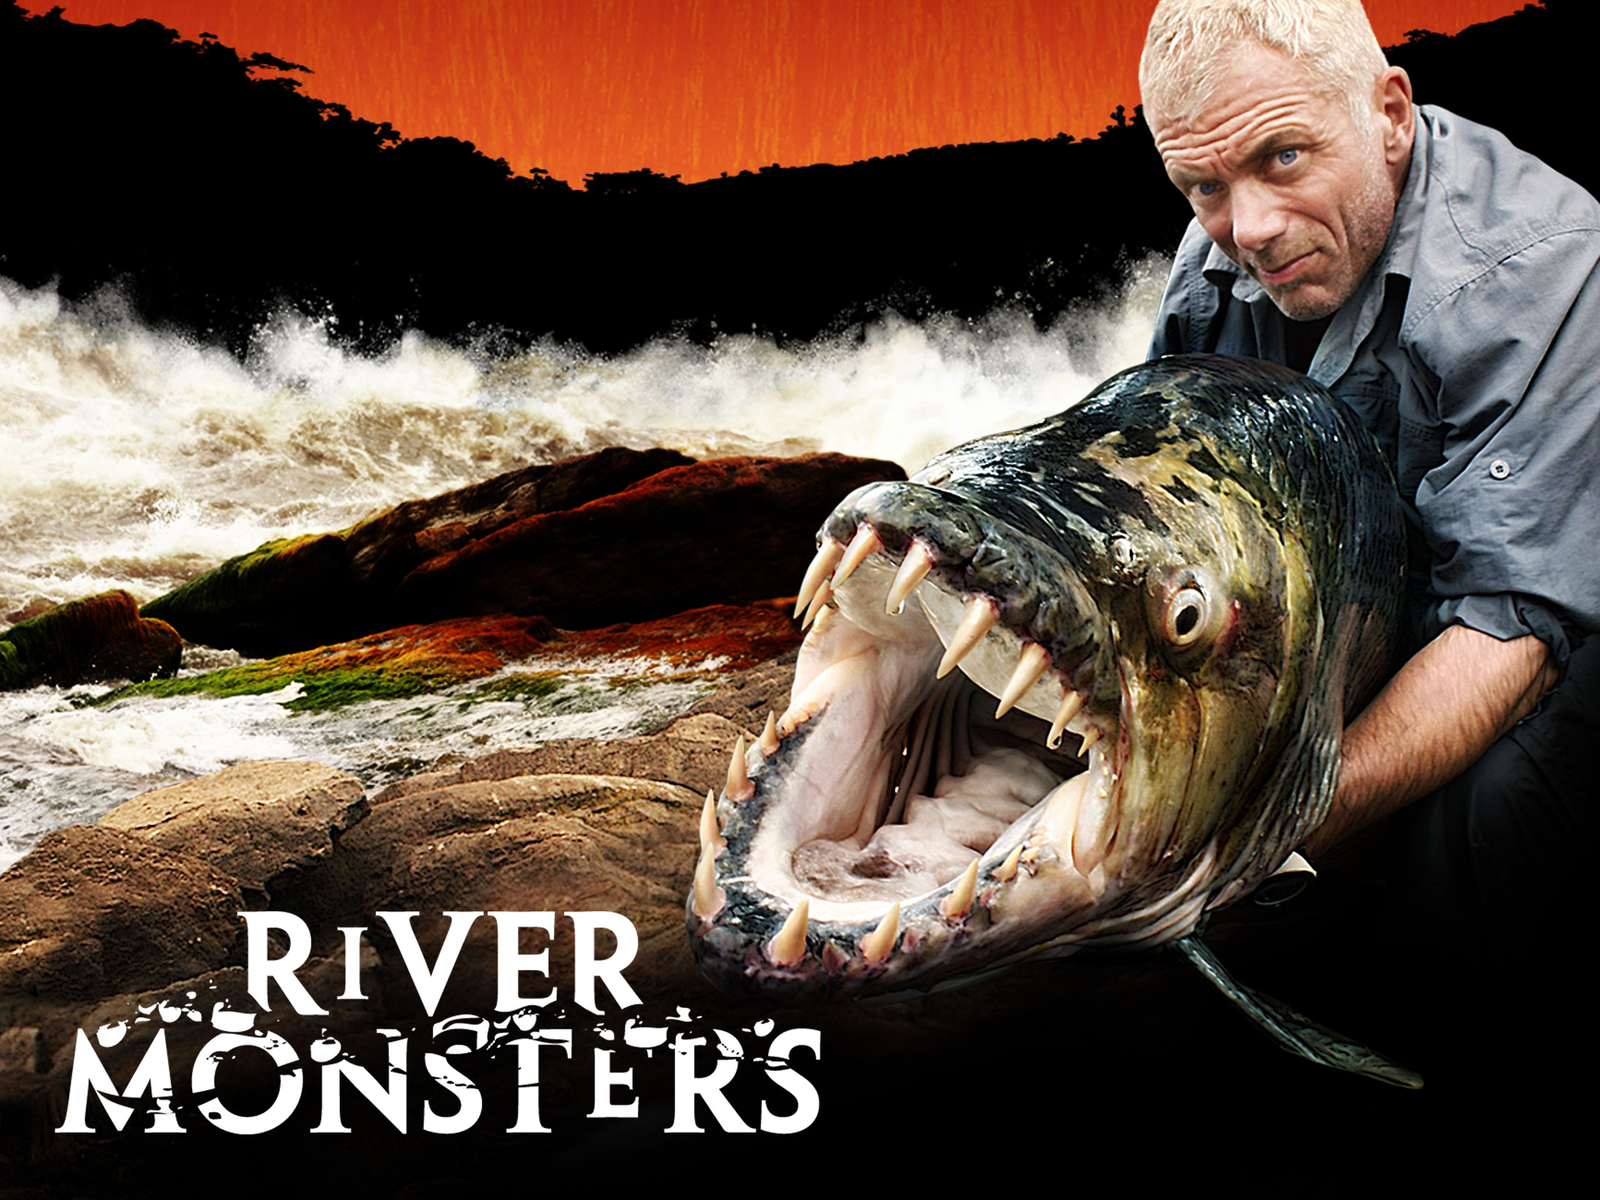 The reason River Monsters ended